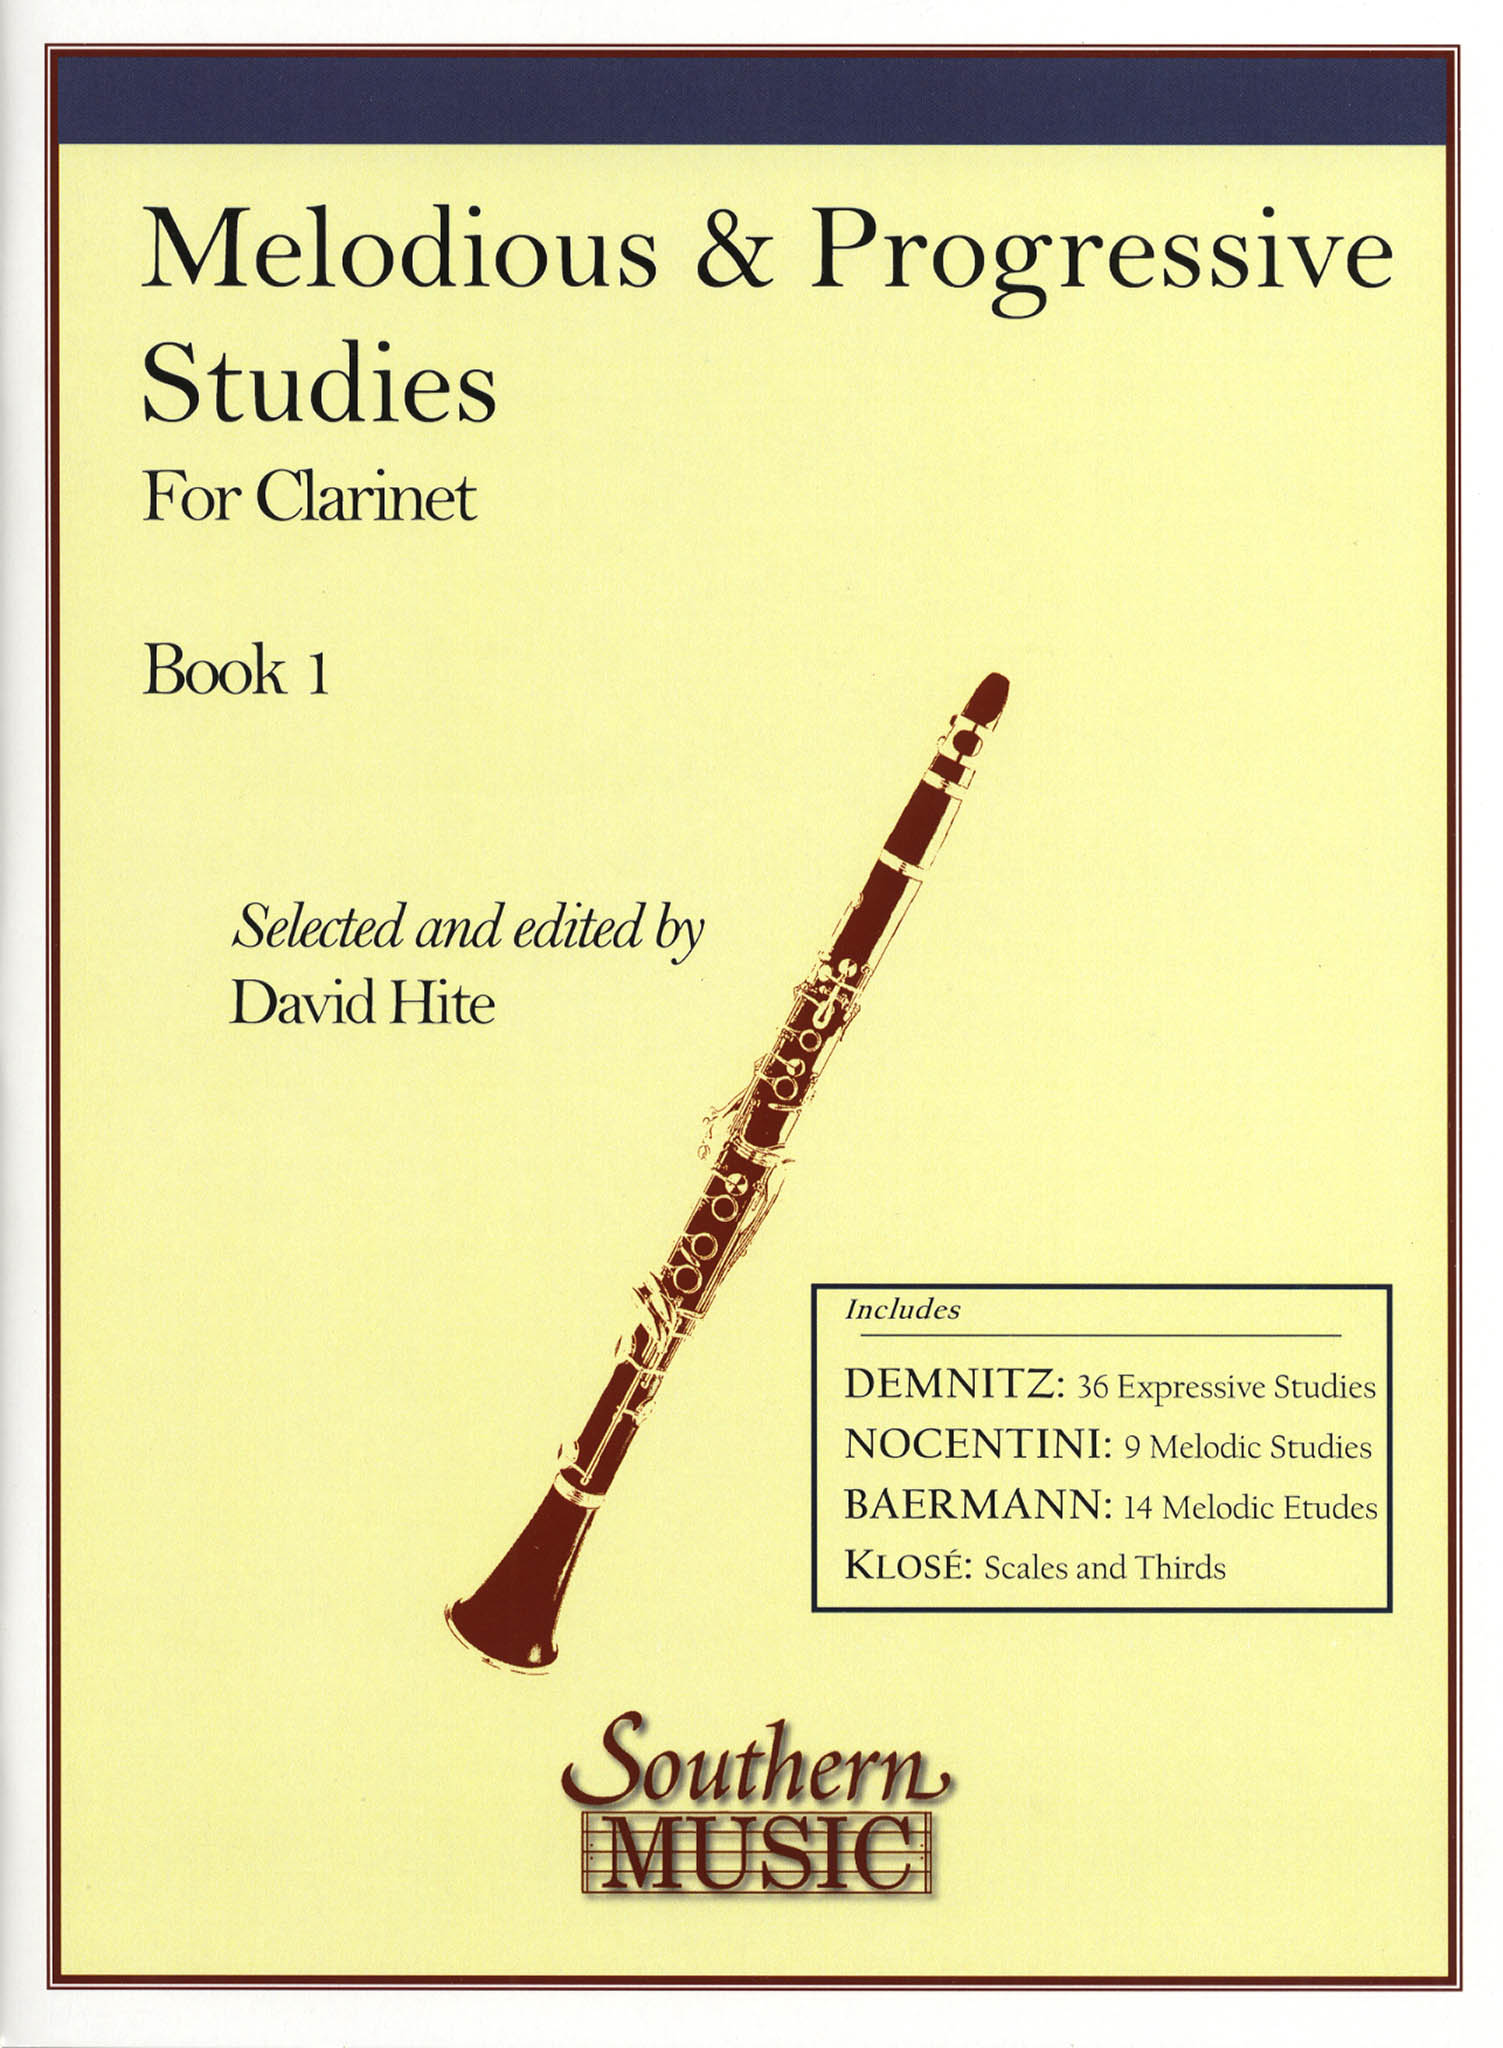 Melodious & Progressive Studies for Clarinet, Book 1 Cover